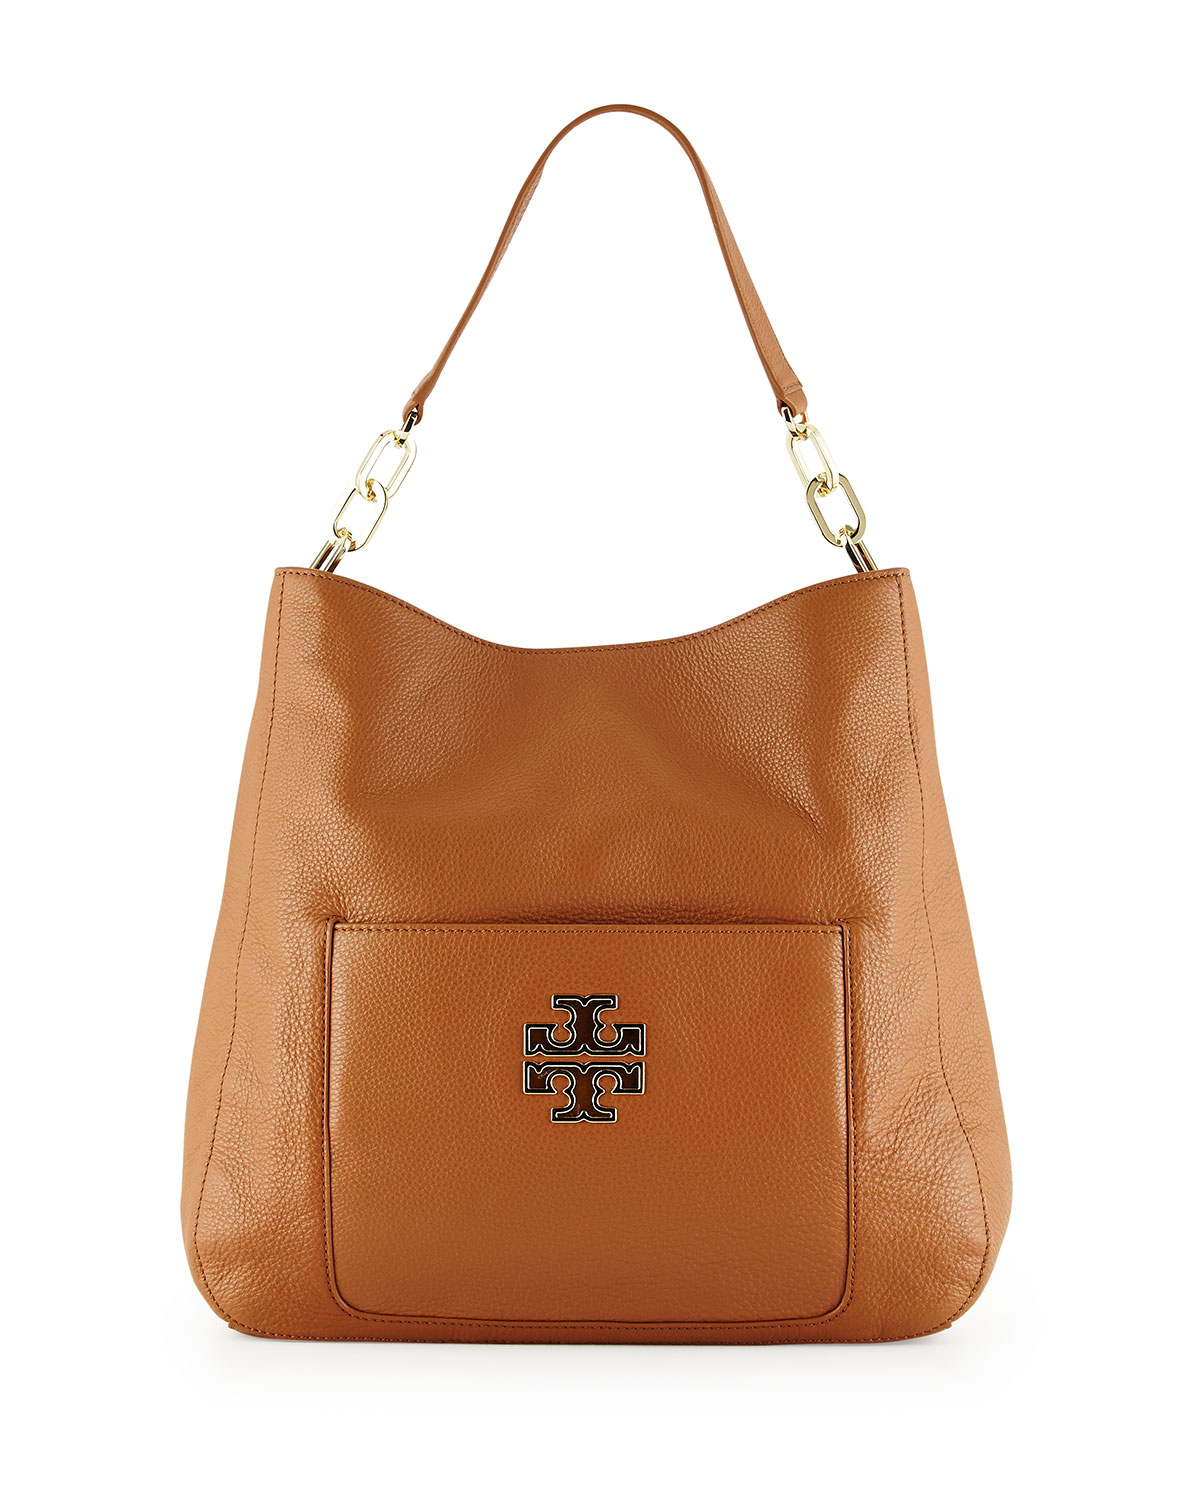 Tory burch Britten Pebbled Leather Hobo Bag in Brown | Lyst